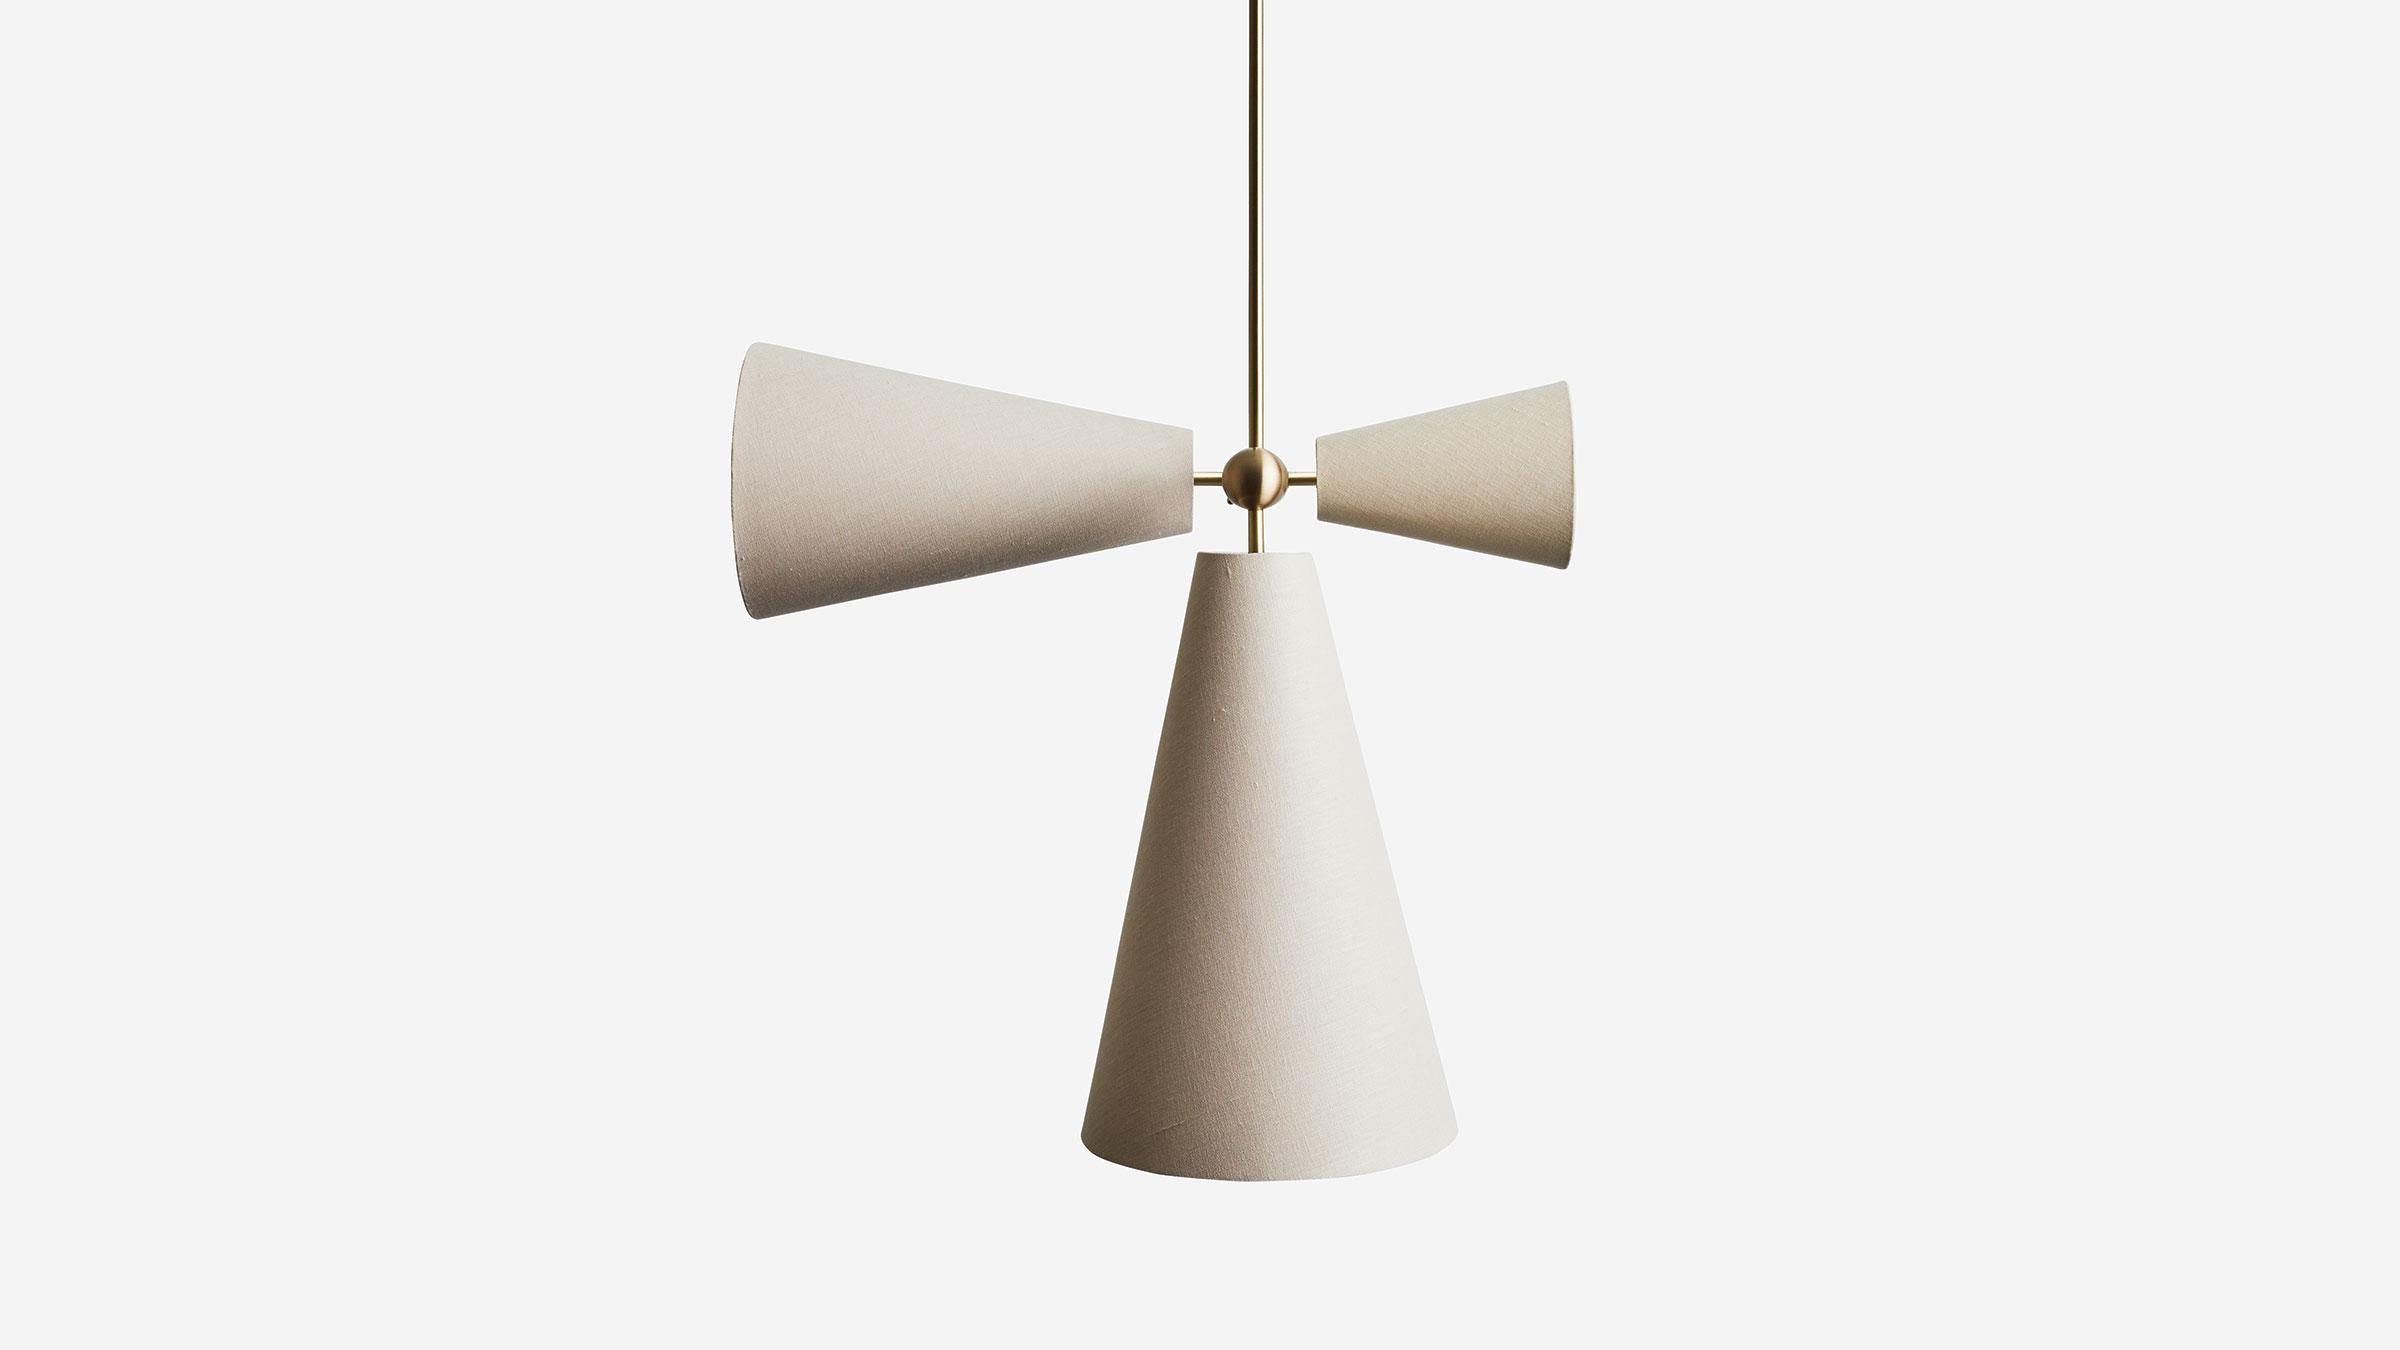 Pendolo IV balances two sets of opposing cone forms to create a dynamic expression of movement in multiple axes. Casting directional light onto 4 distinct zones, Pendolo IV embodies the collection at-large through its perspectival play on the cone